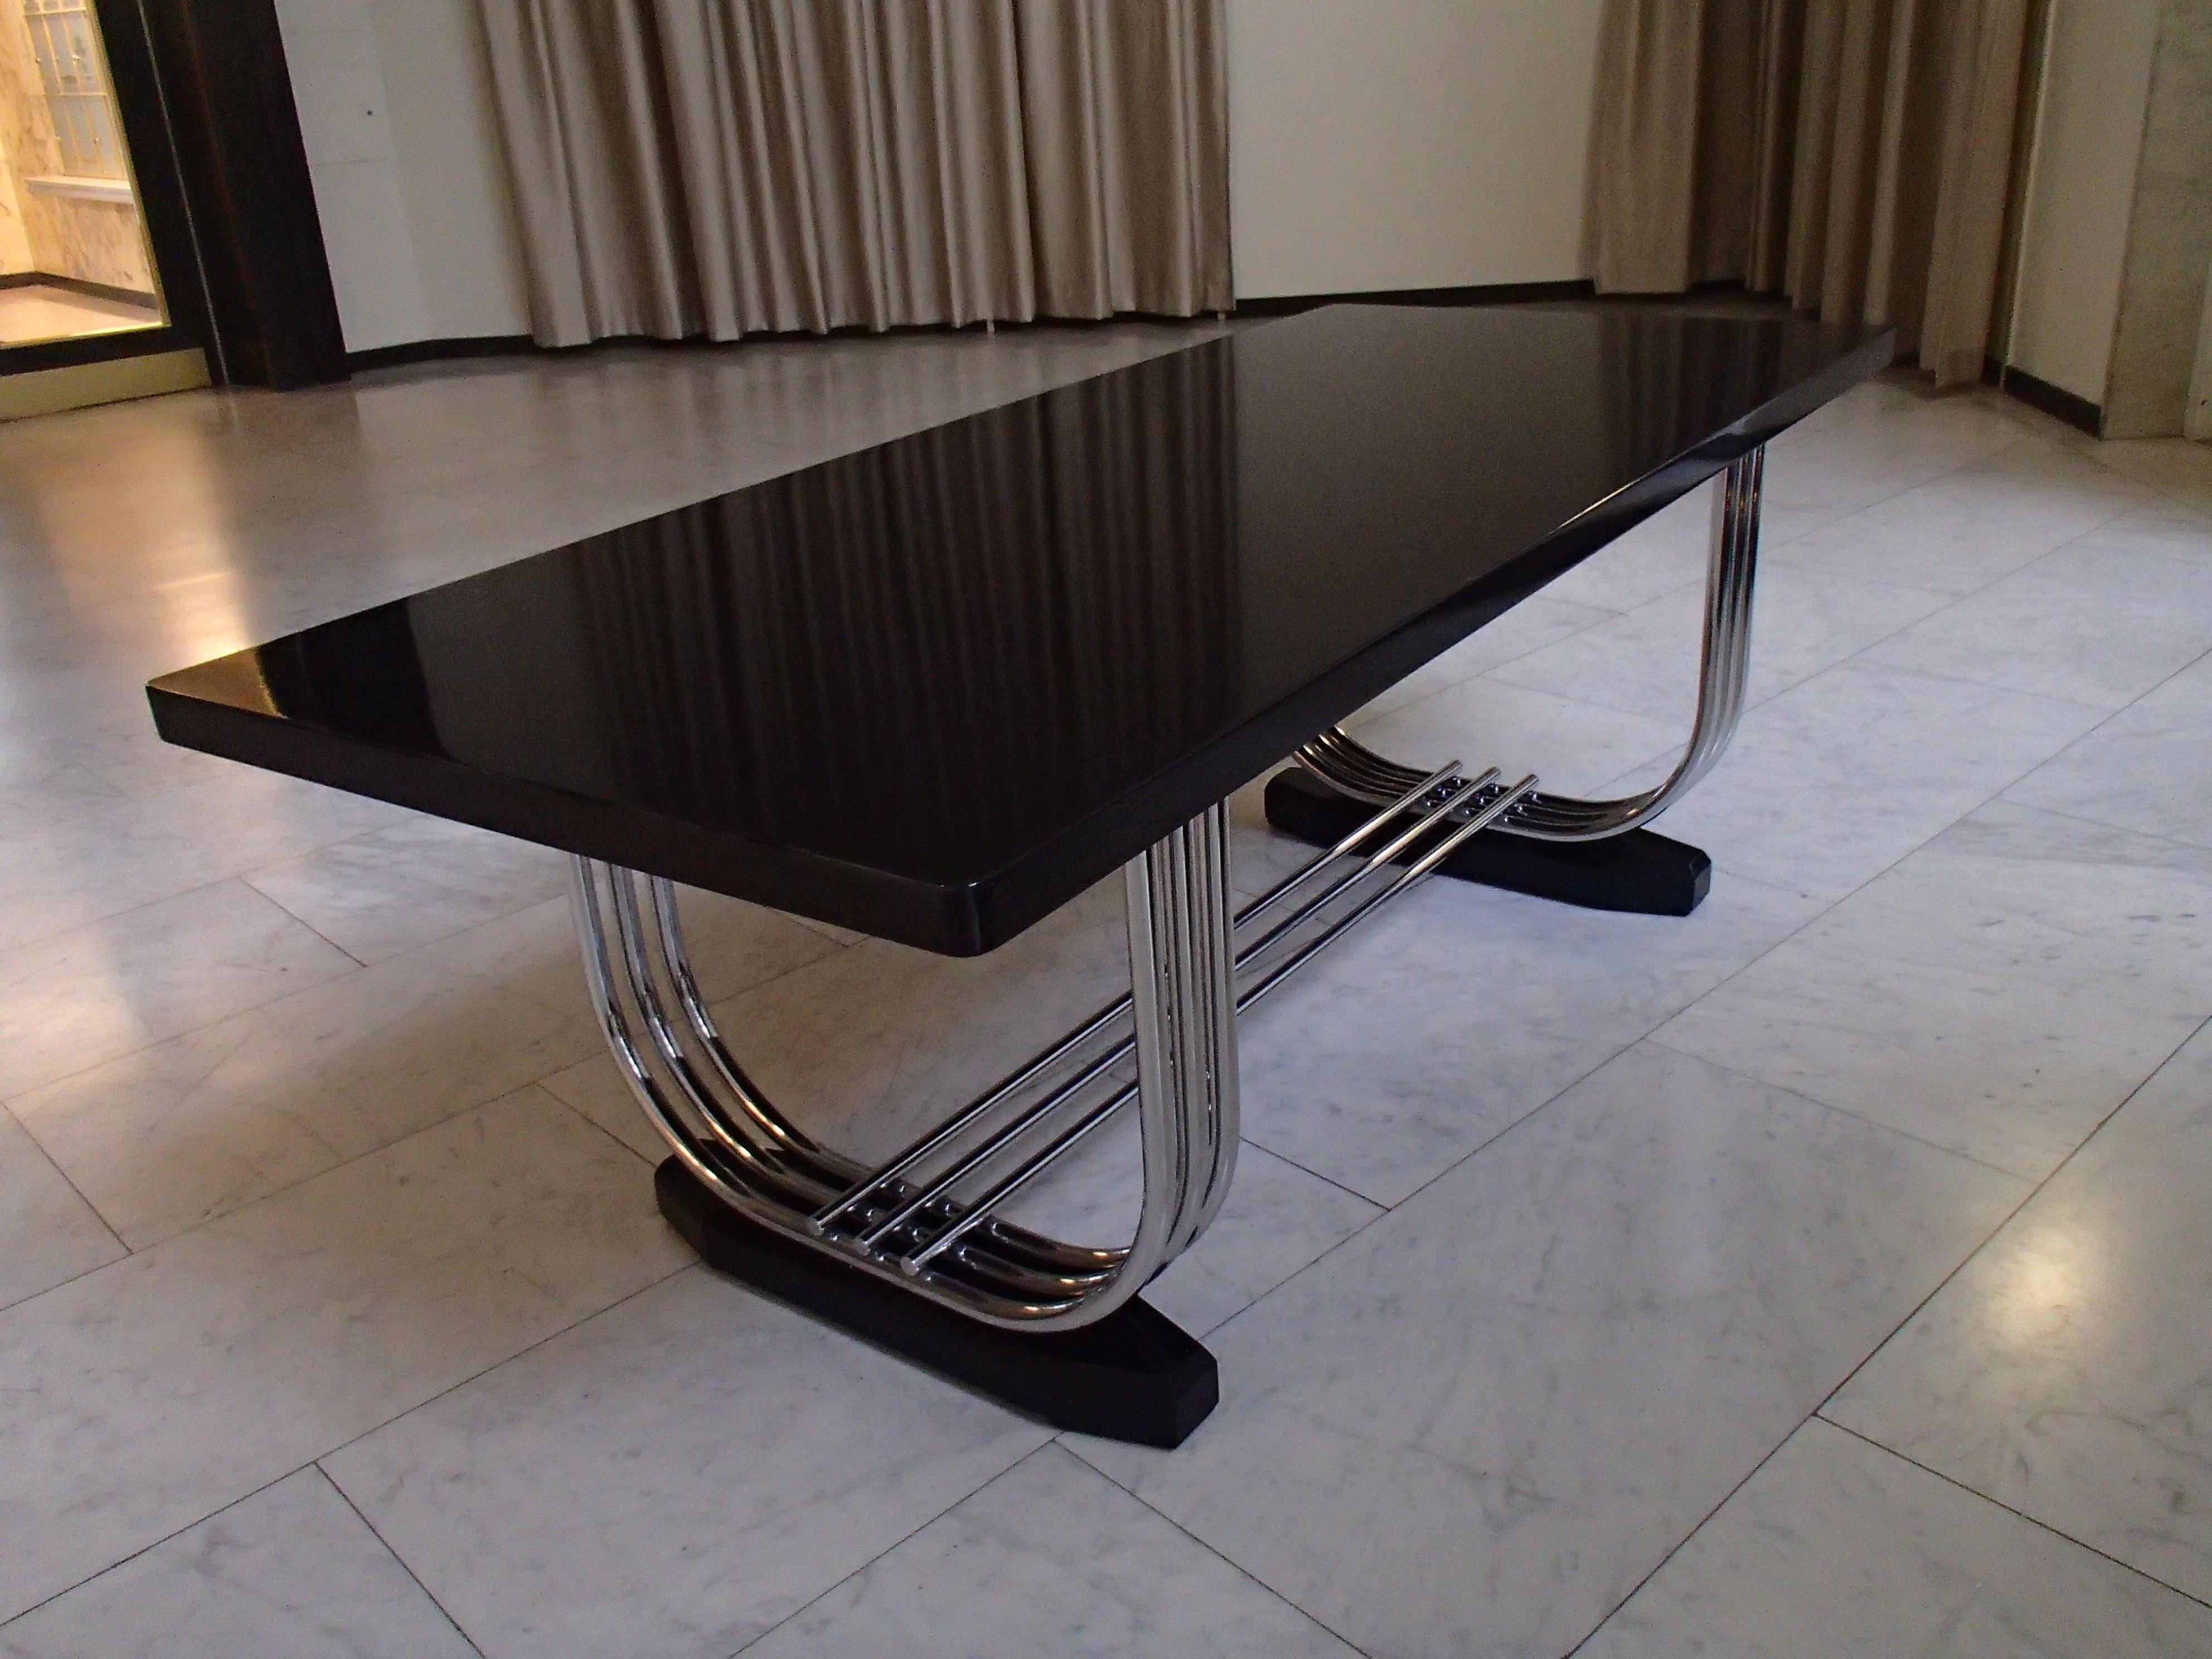 Very elegant french inspired large black laquered table with chrom tubular legs produced by PEL between 1933 and 1936 .Serge Chermayeff (1900–1996)
 was one of Britain’s most admired inter-war architects and designers. Chermayeff moved across